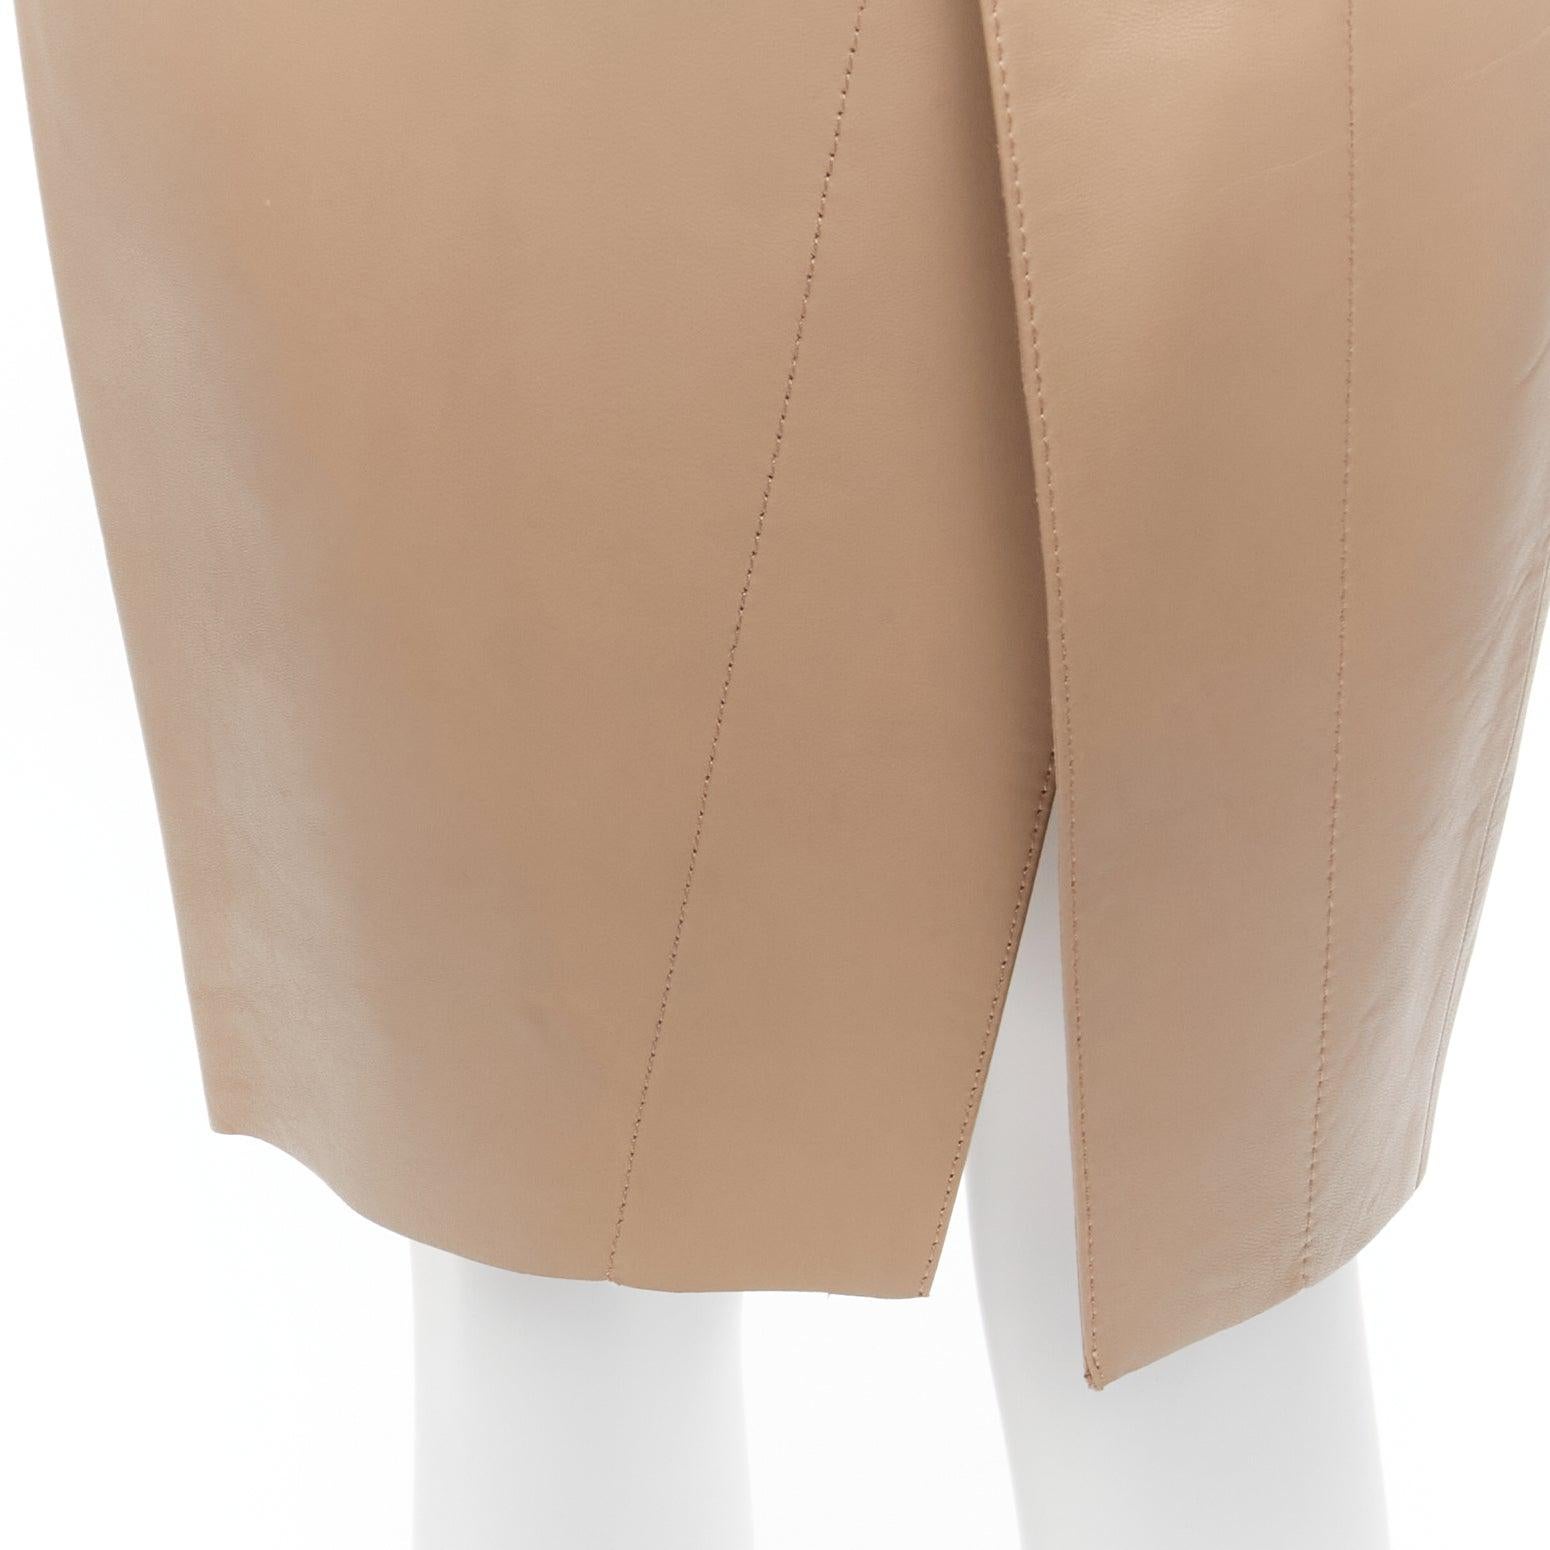 ACNE STUDIOS 2014 beige calf leather minimalistic split front skirt FR34 XS
Reference: SNKO/A00306
Brand: Acne Studios
Collection: AW2014
Material: Calfskin Leather
Color: Beige
Pattern: Solid
Closure: Zip Fly
Lining: White Fabric
Extra Details: